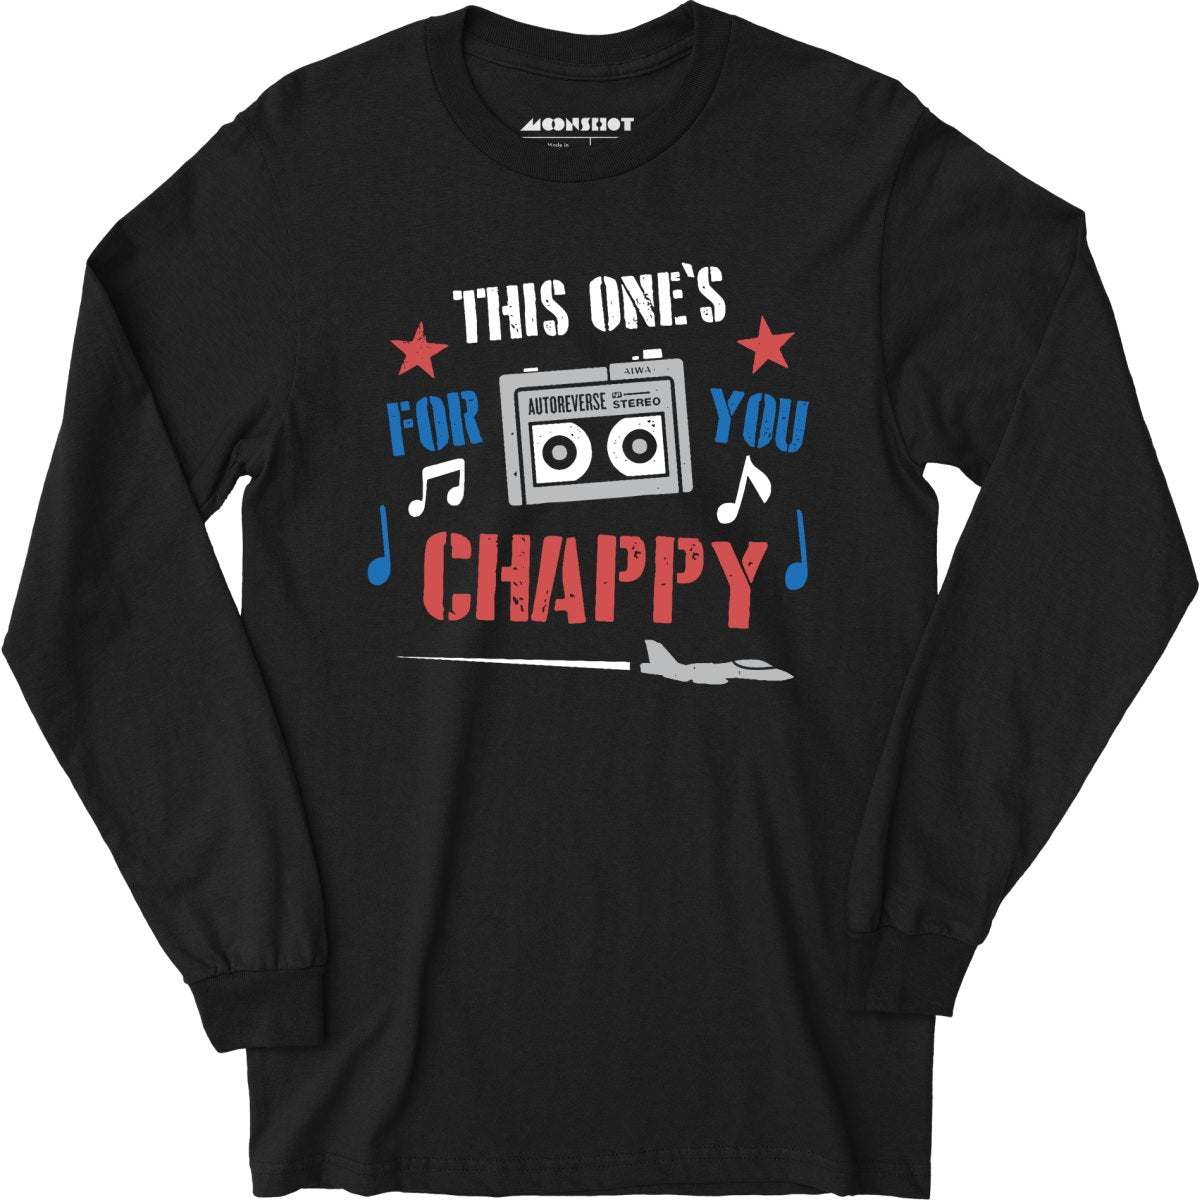 This One's For You Chappy - Iron Eagle - Long Sleeve T-Shirt